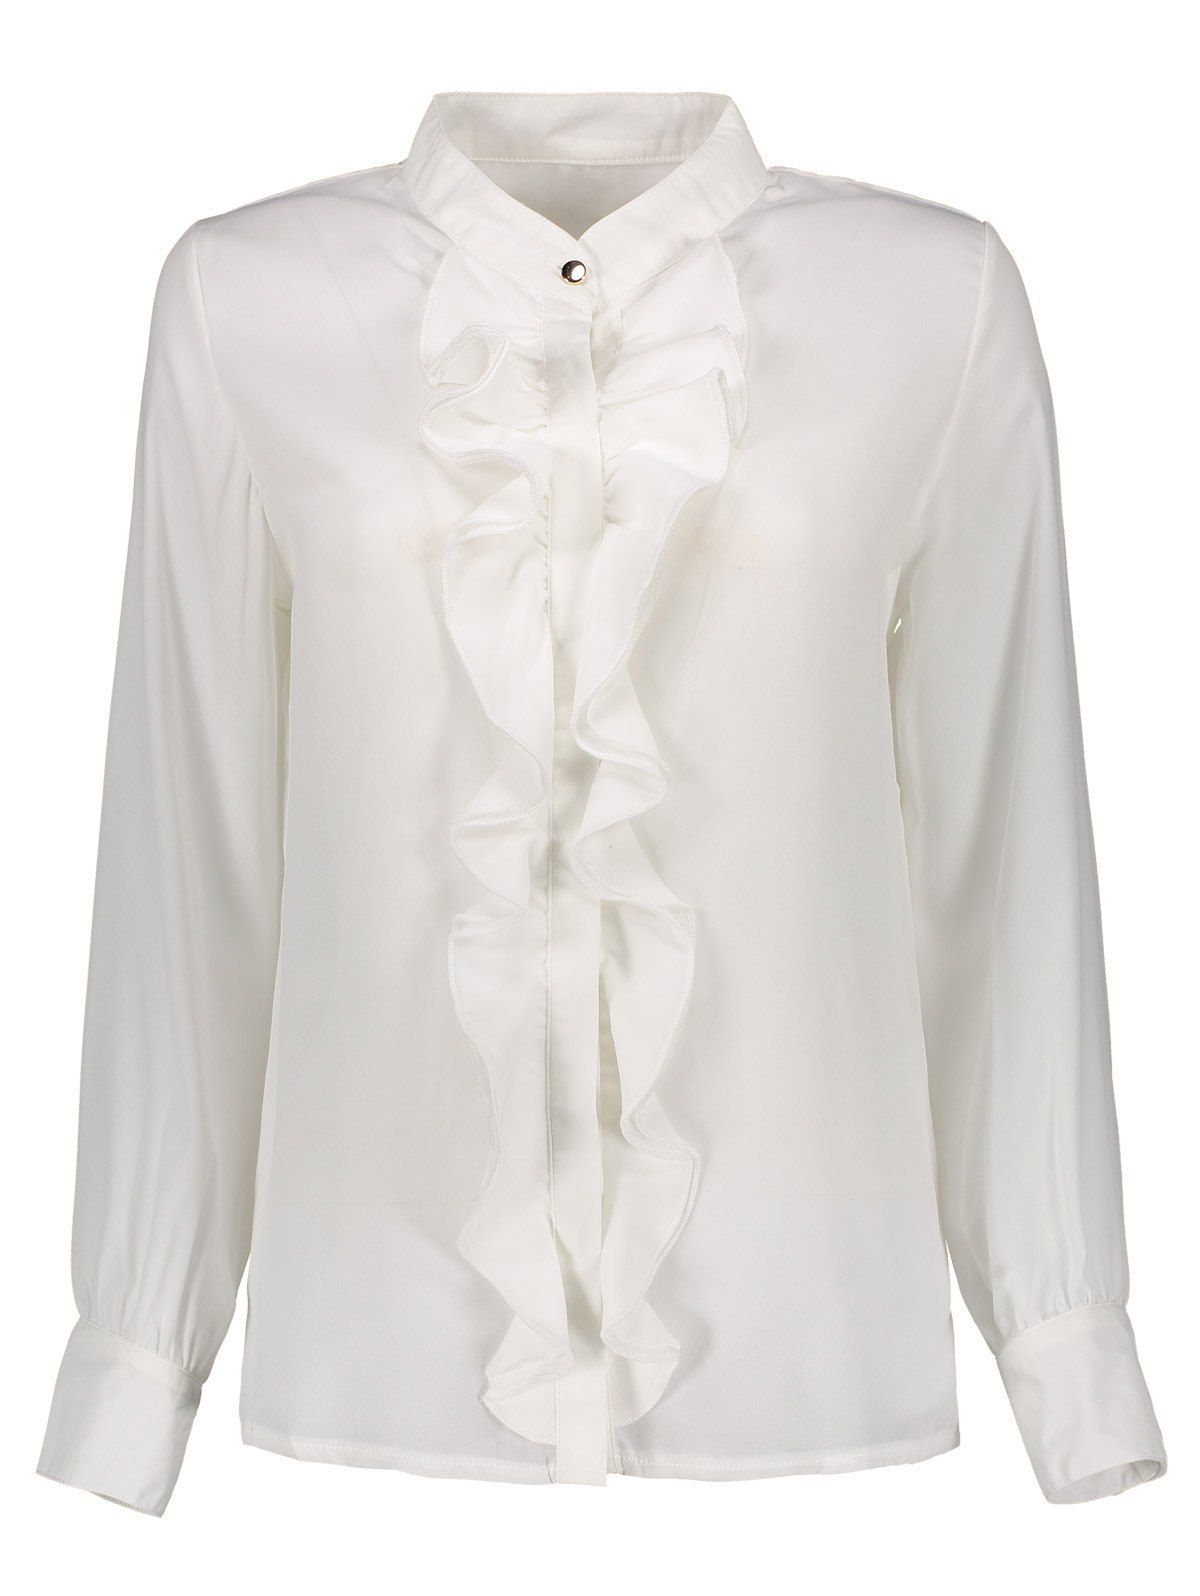 [17% OFF] 2021 Flounced Button Cuffs Blouse In WHITE | DressLily